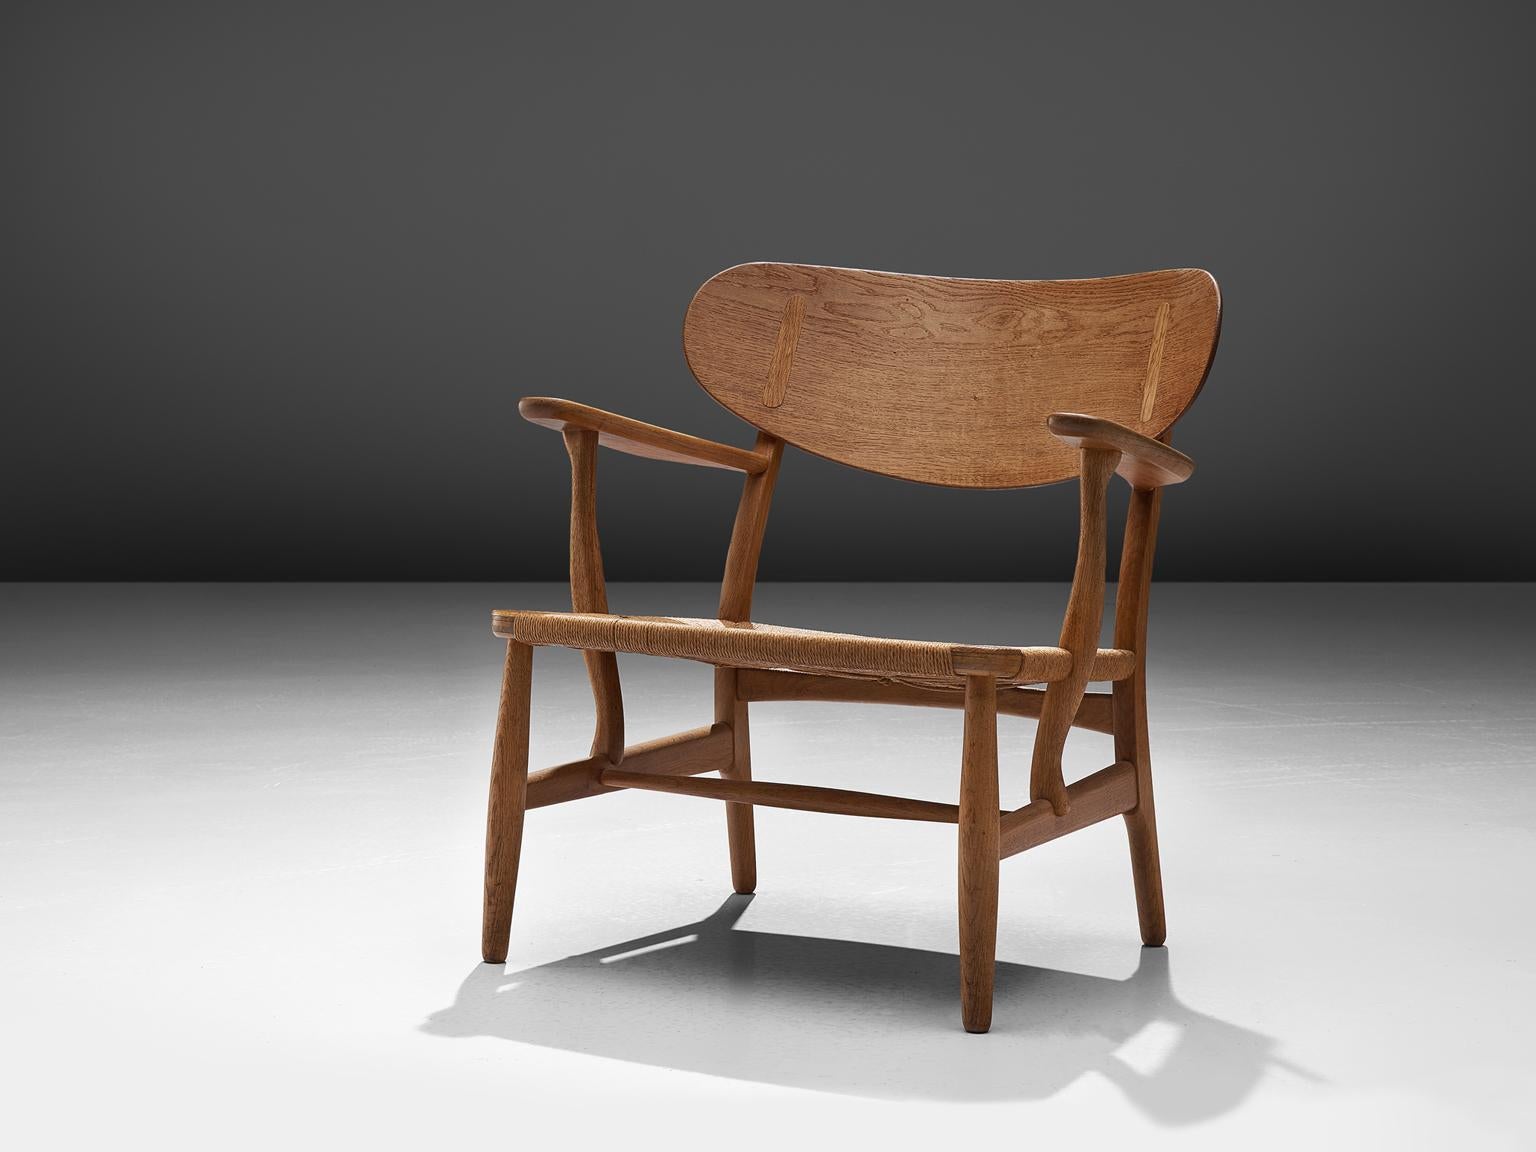 Hans J. Wegner for Carl Hansen & Søn, armchair model CH22 by Denmark, 1950.

This chair is one of Wegner's early masterpieces for Carl Hansen. The chair bears the first number of a highly interesting collection that was realized during the